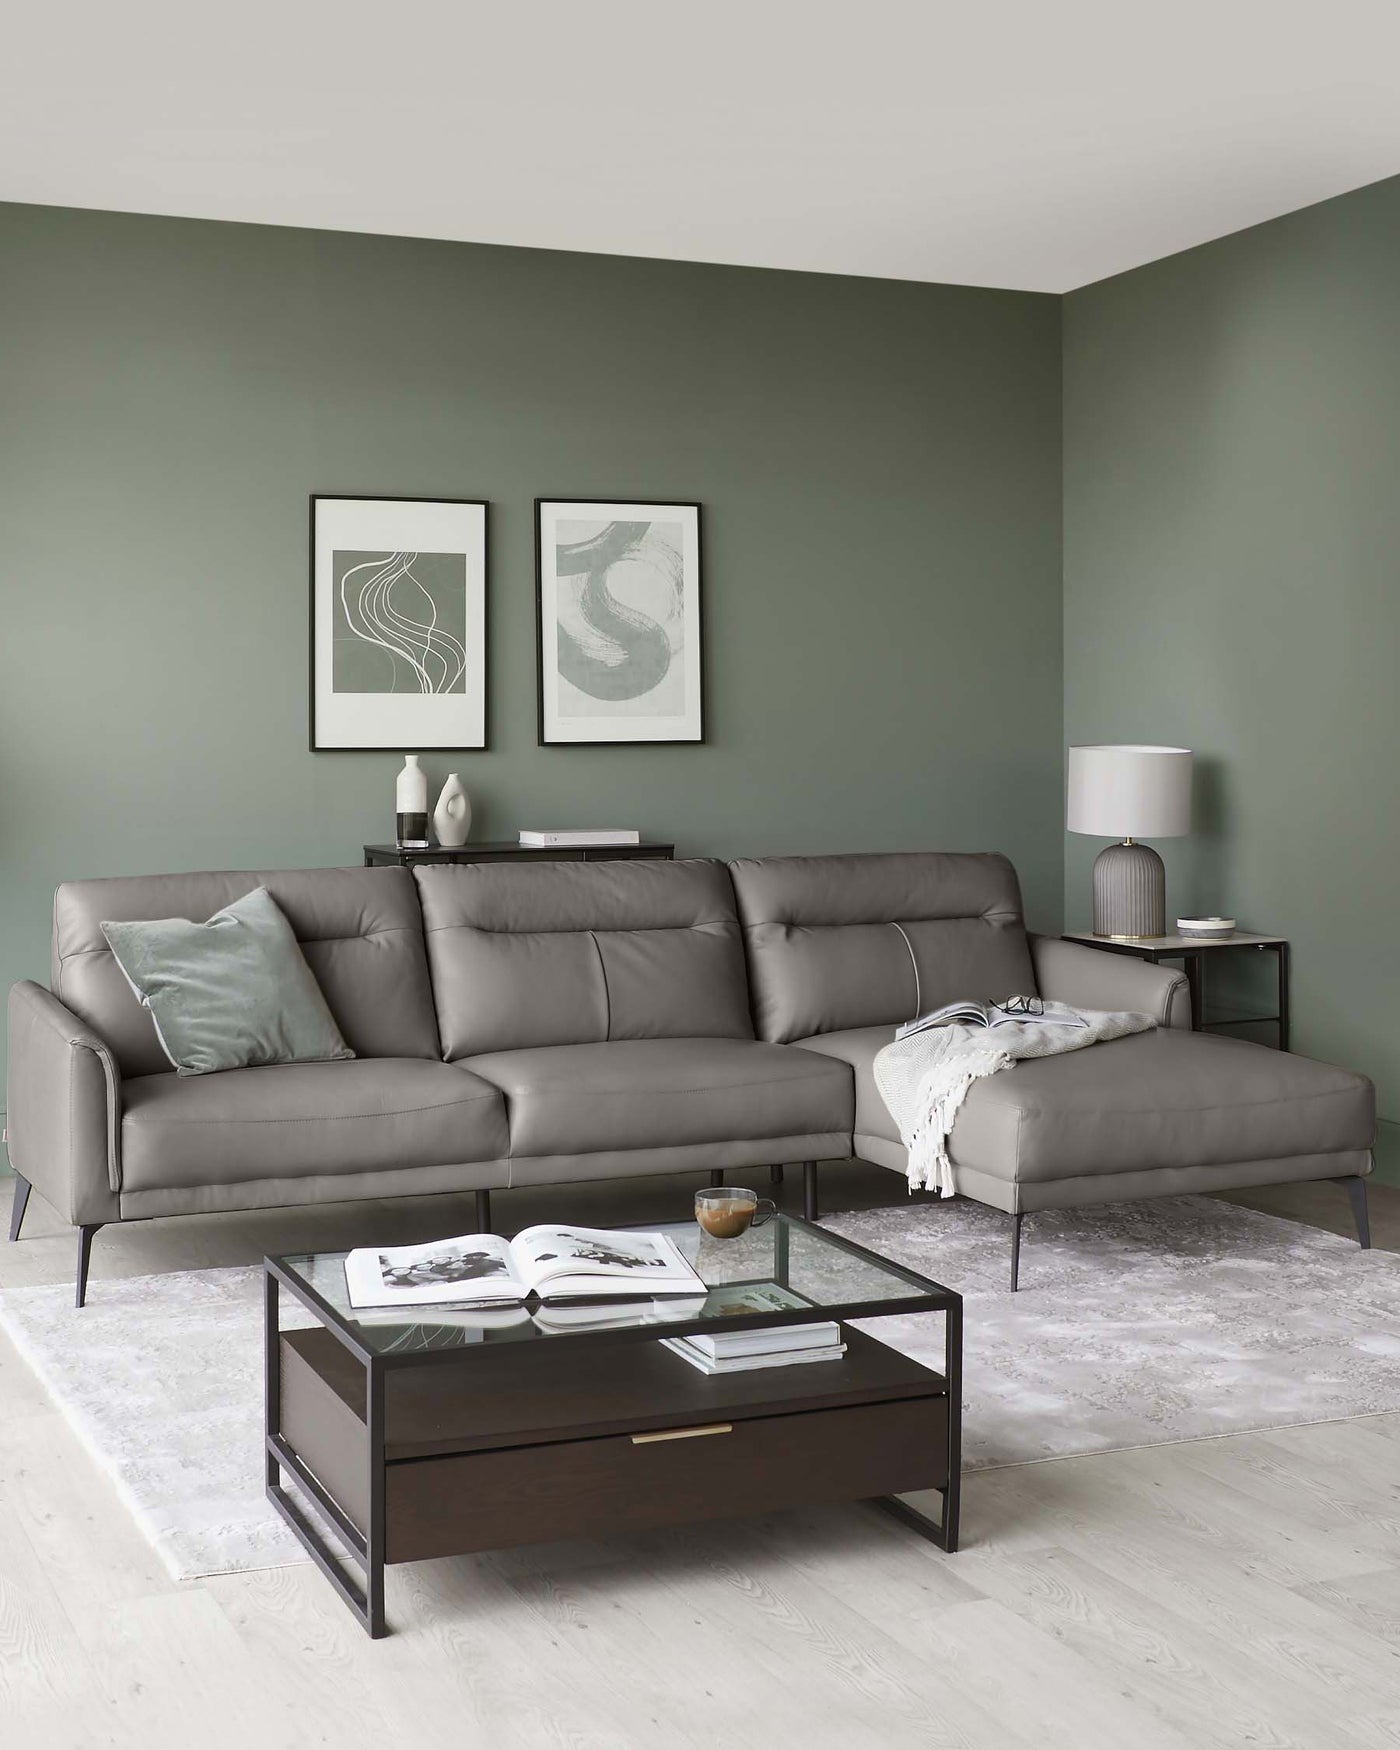 Modern living room featuring a sleek, grey L-shaped sectional sofa with metal legs, a dark wooden coffee table with a clear glass top and an open shelf, paired with a matching wooden side table holding a cylindrical table lamp.